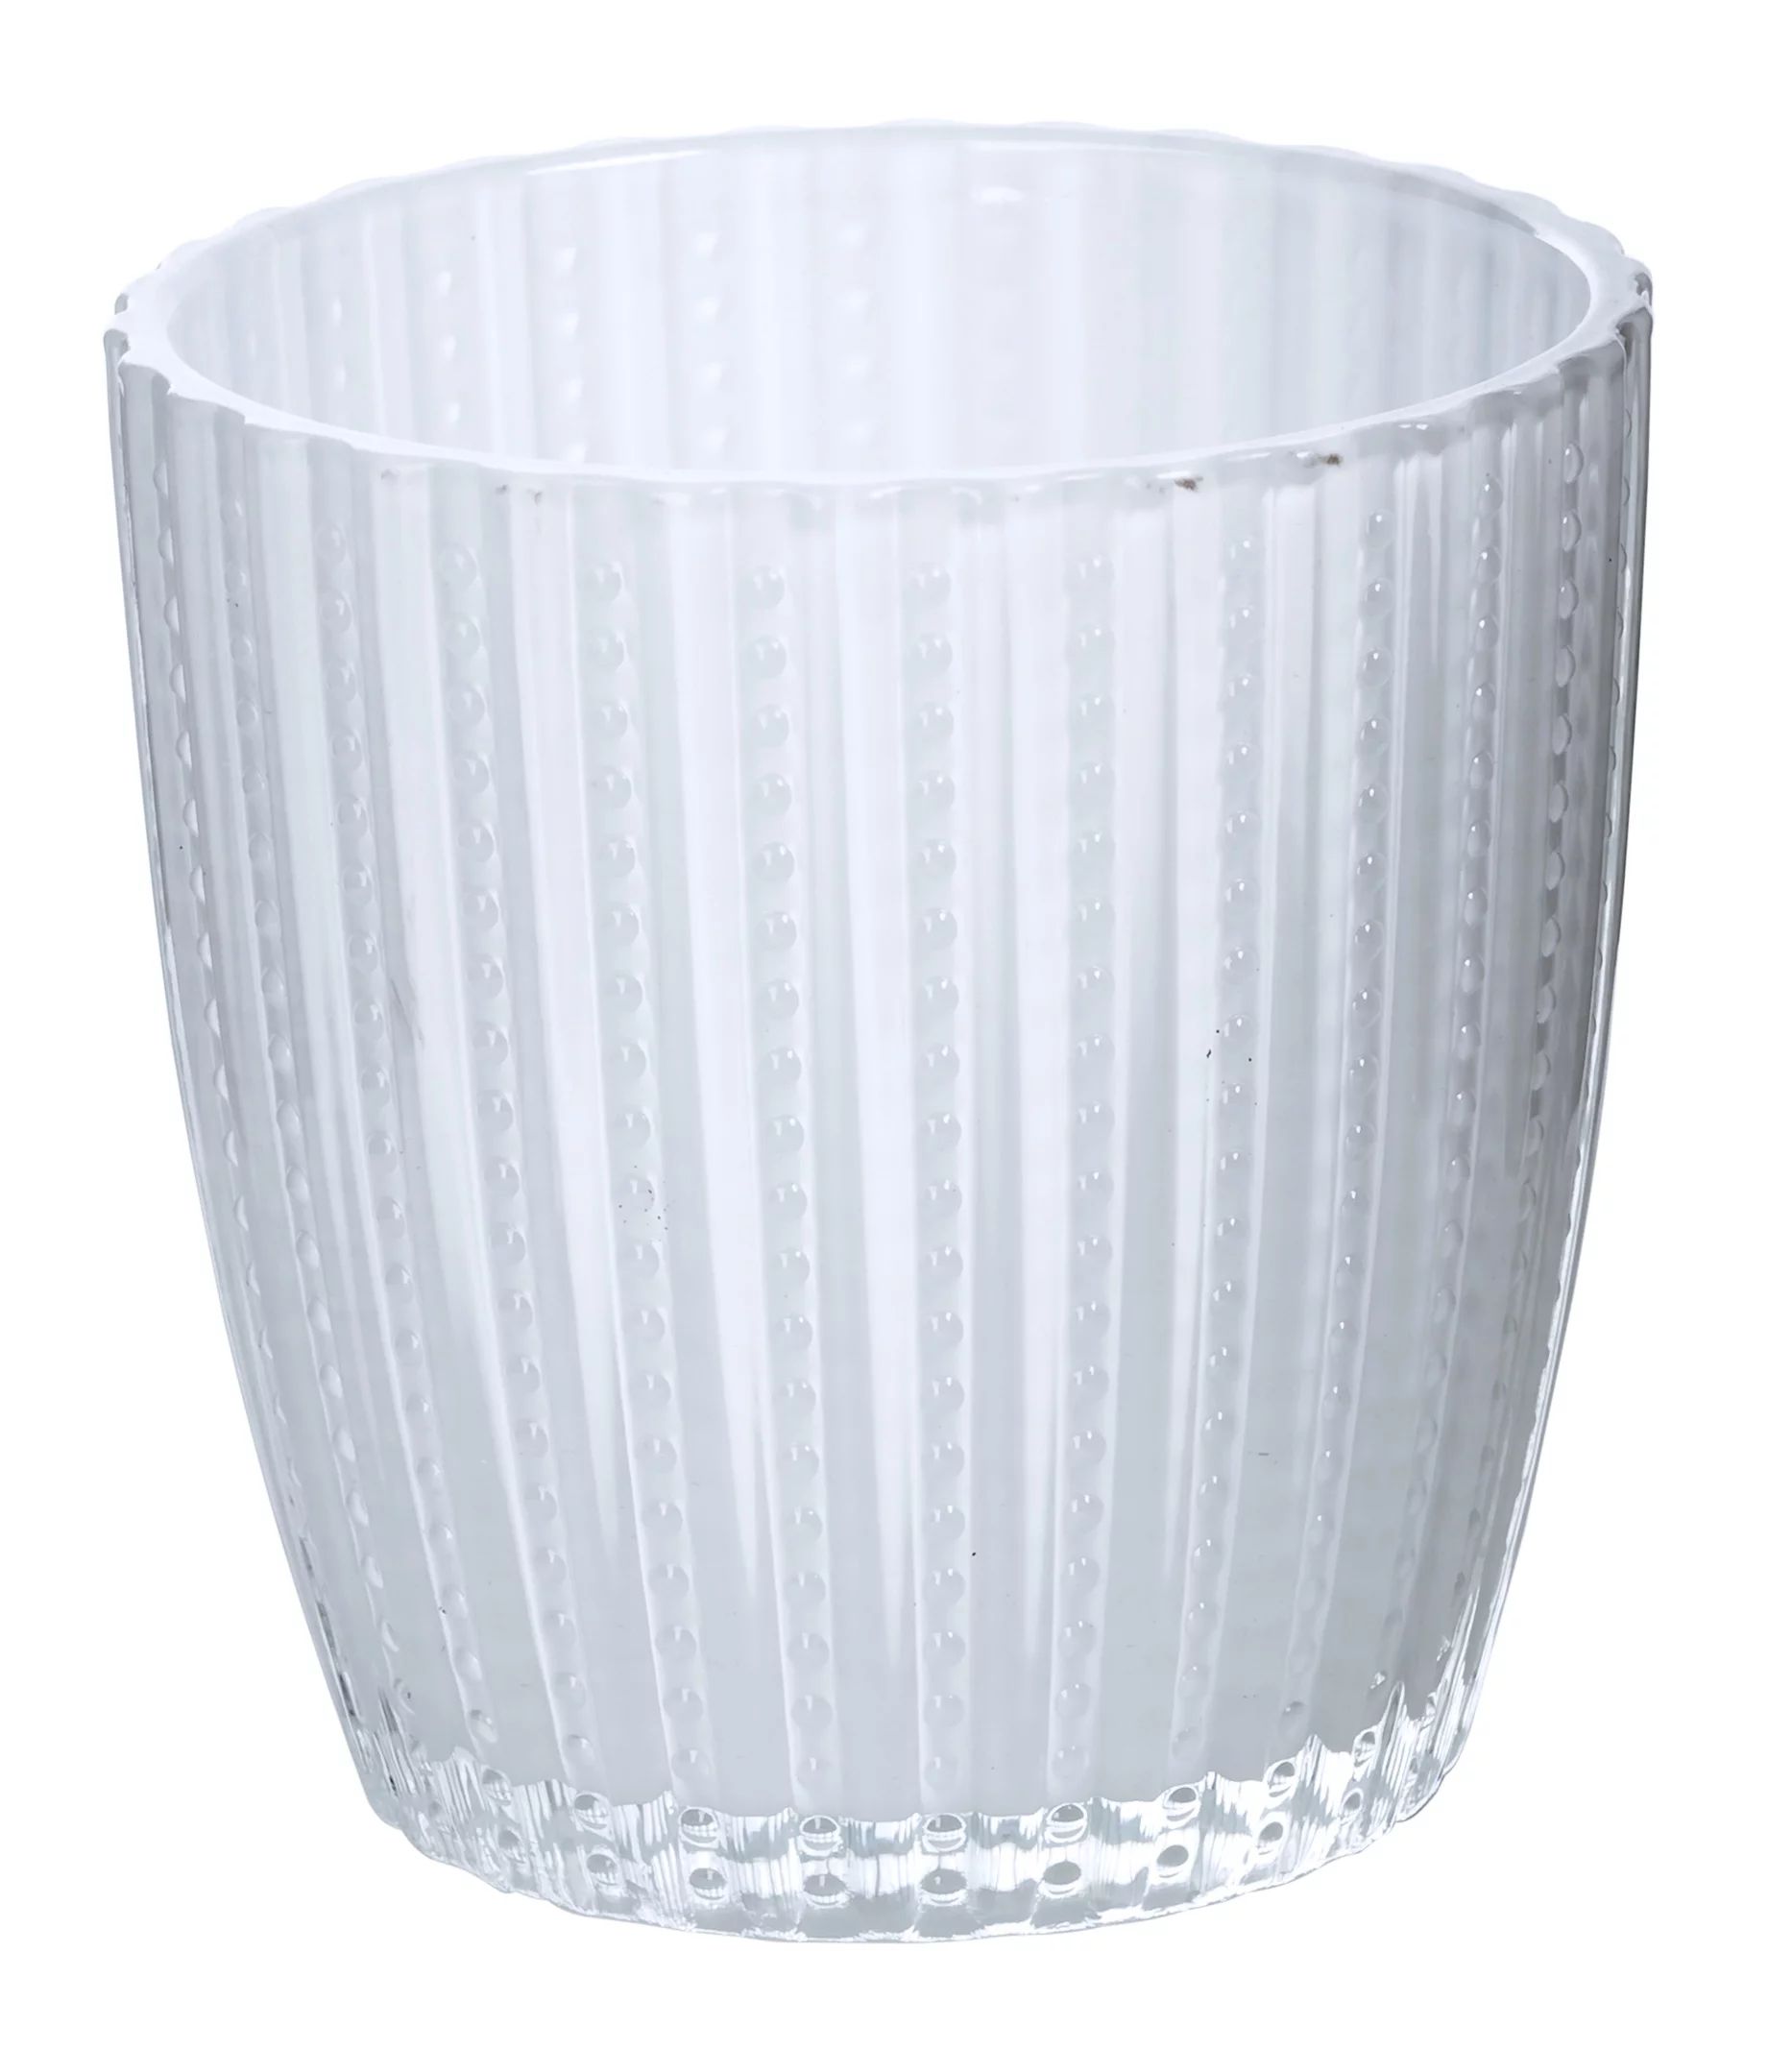 Mainstays White Stripe Glass Votive and Tealight Candle Holders | Walmart (US)